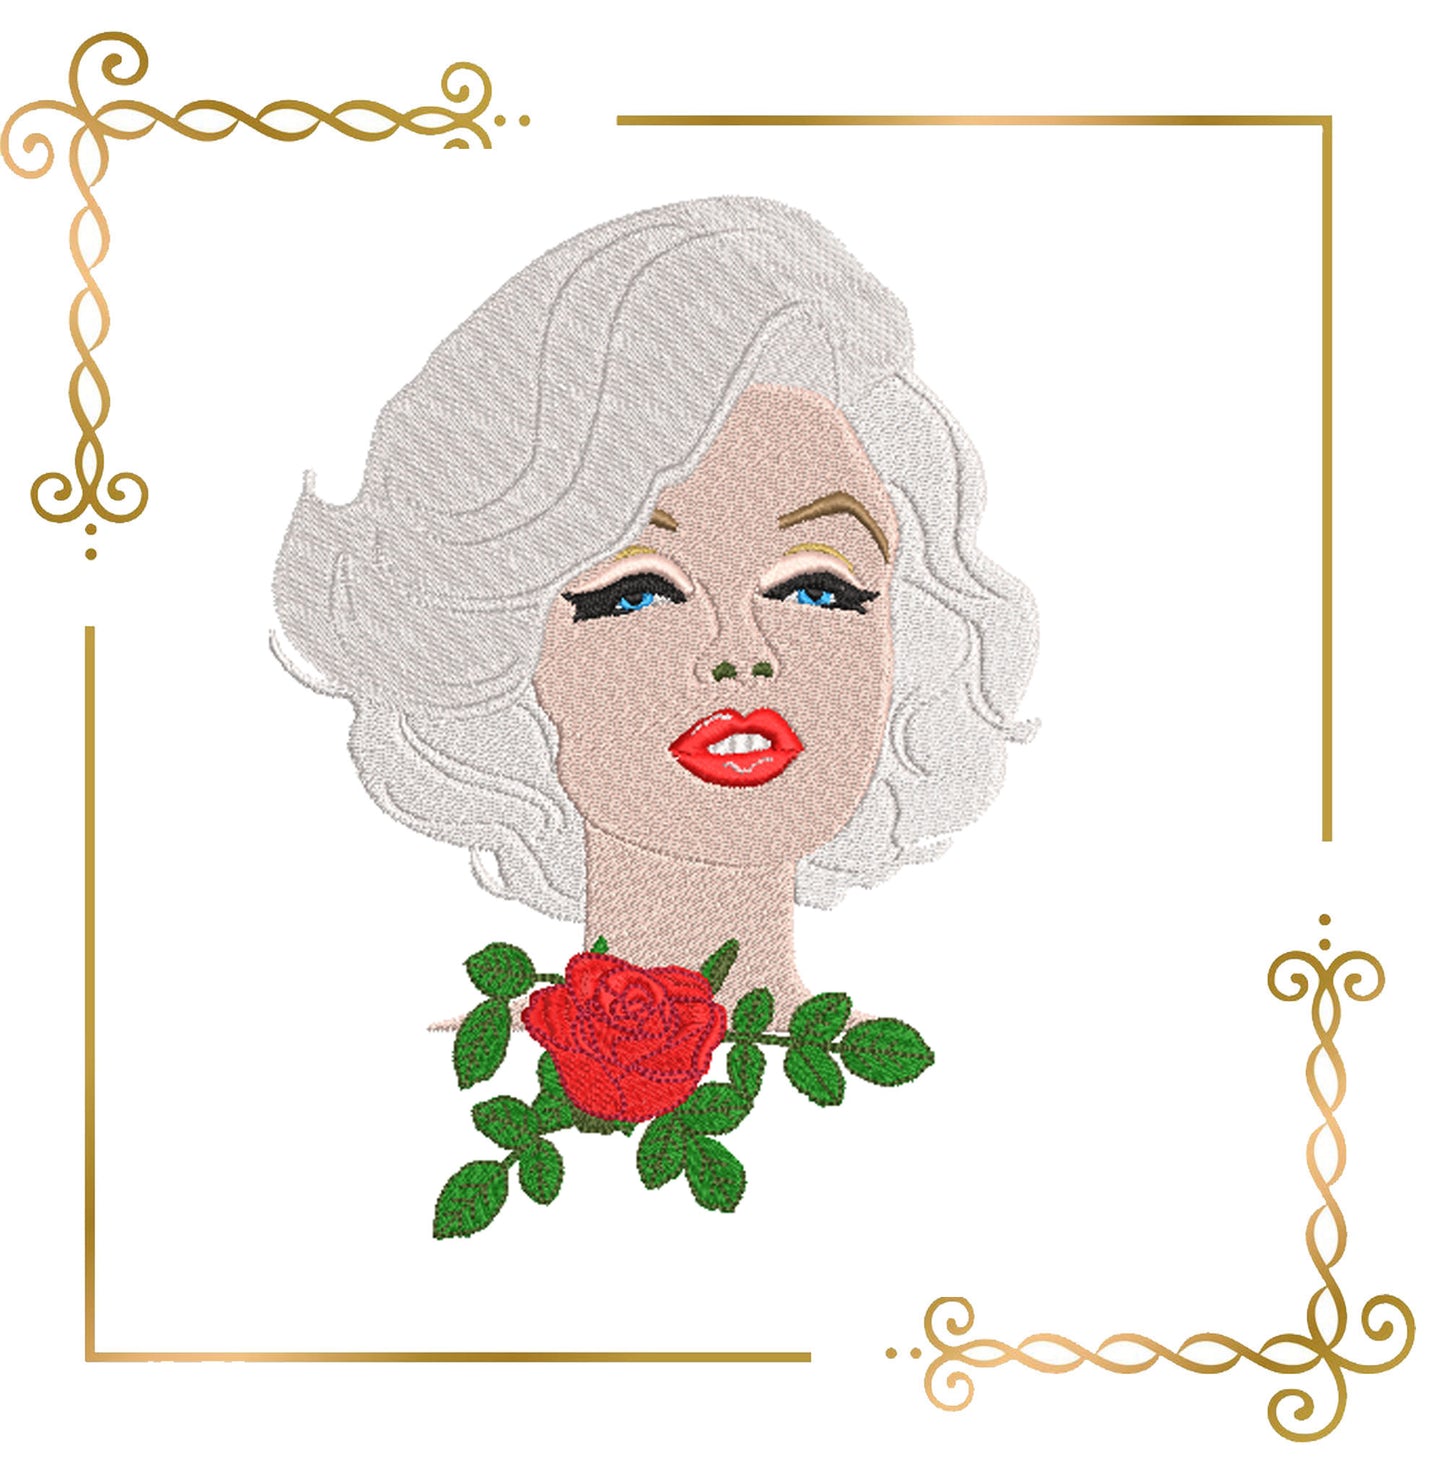 People  Marilyn Monroe embroidery design People to the direct download.